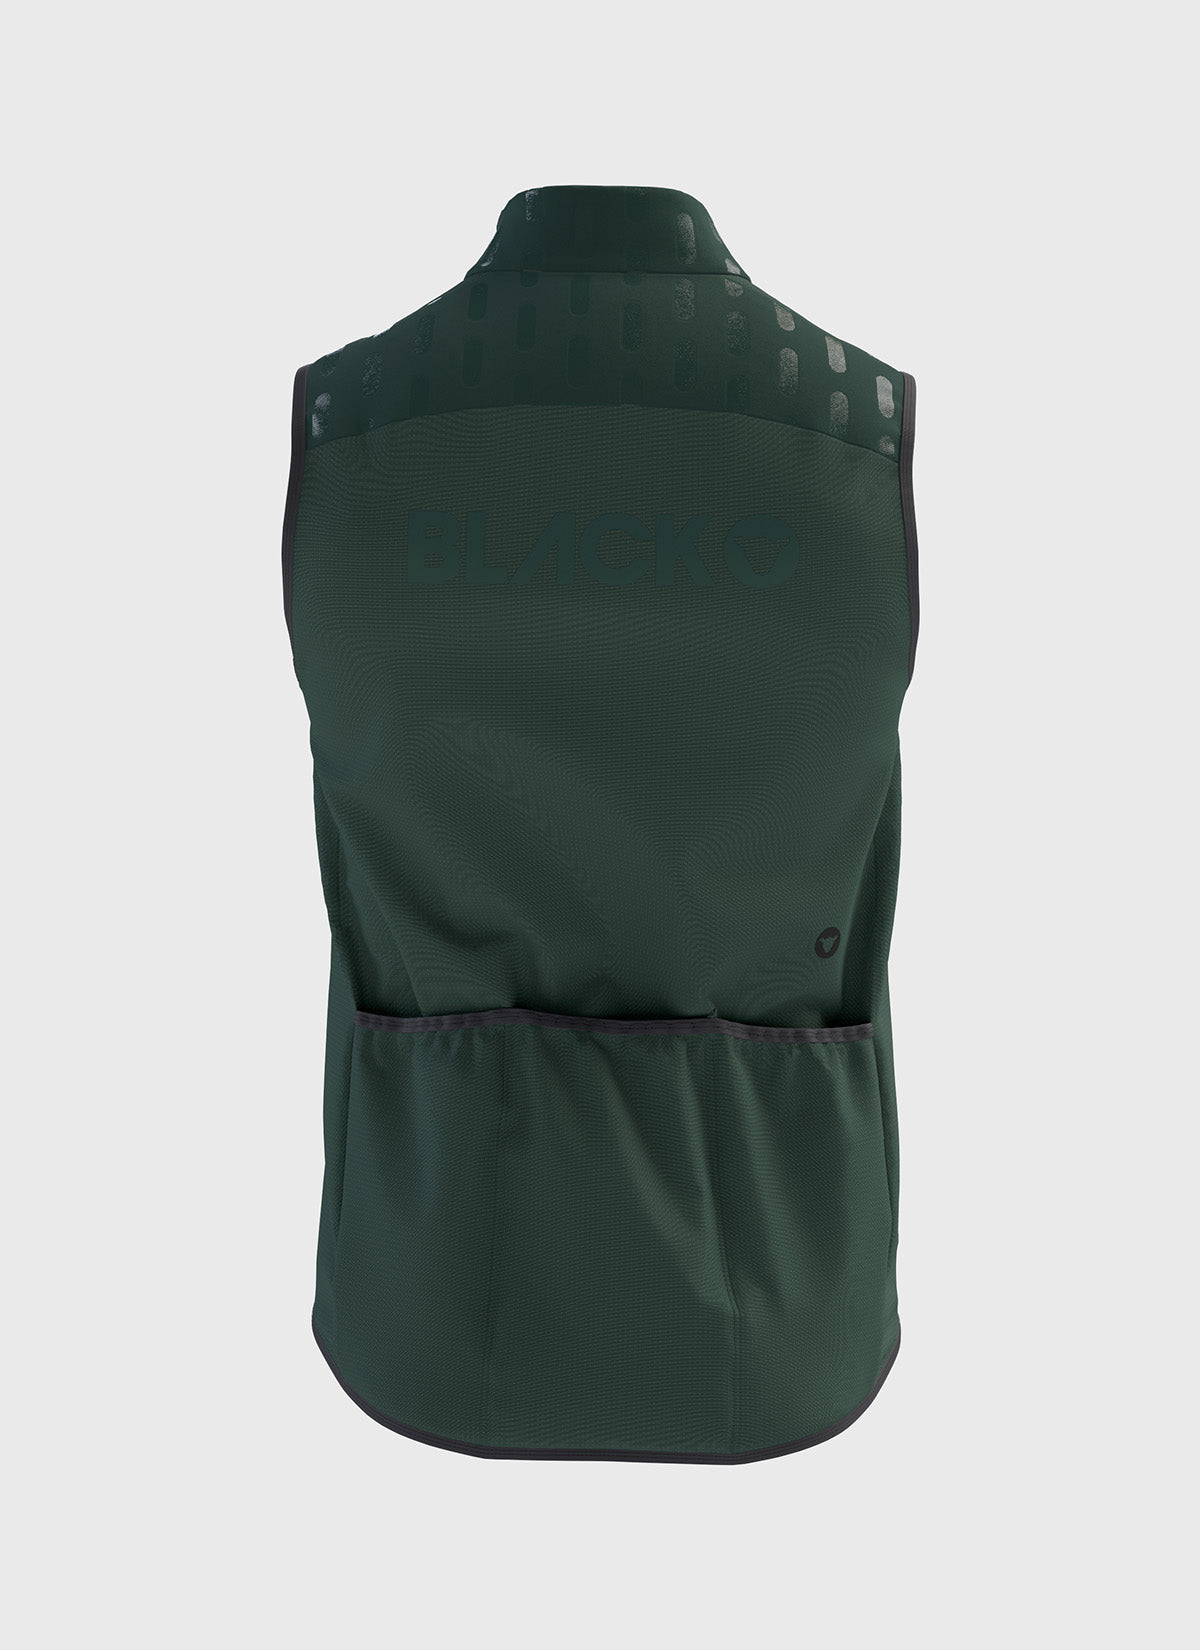 Elements North/South Insulated Vest - Scarab